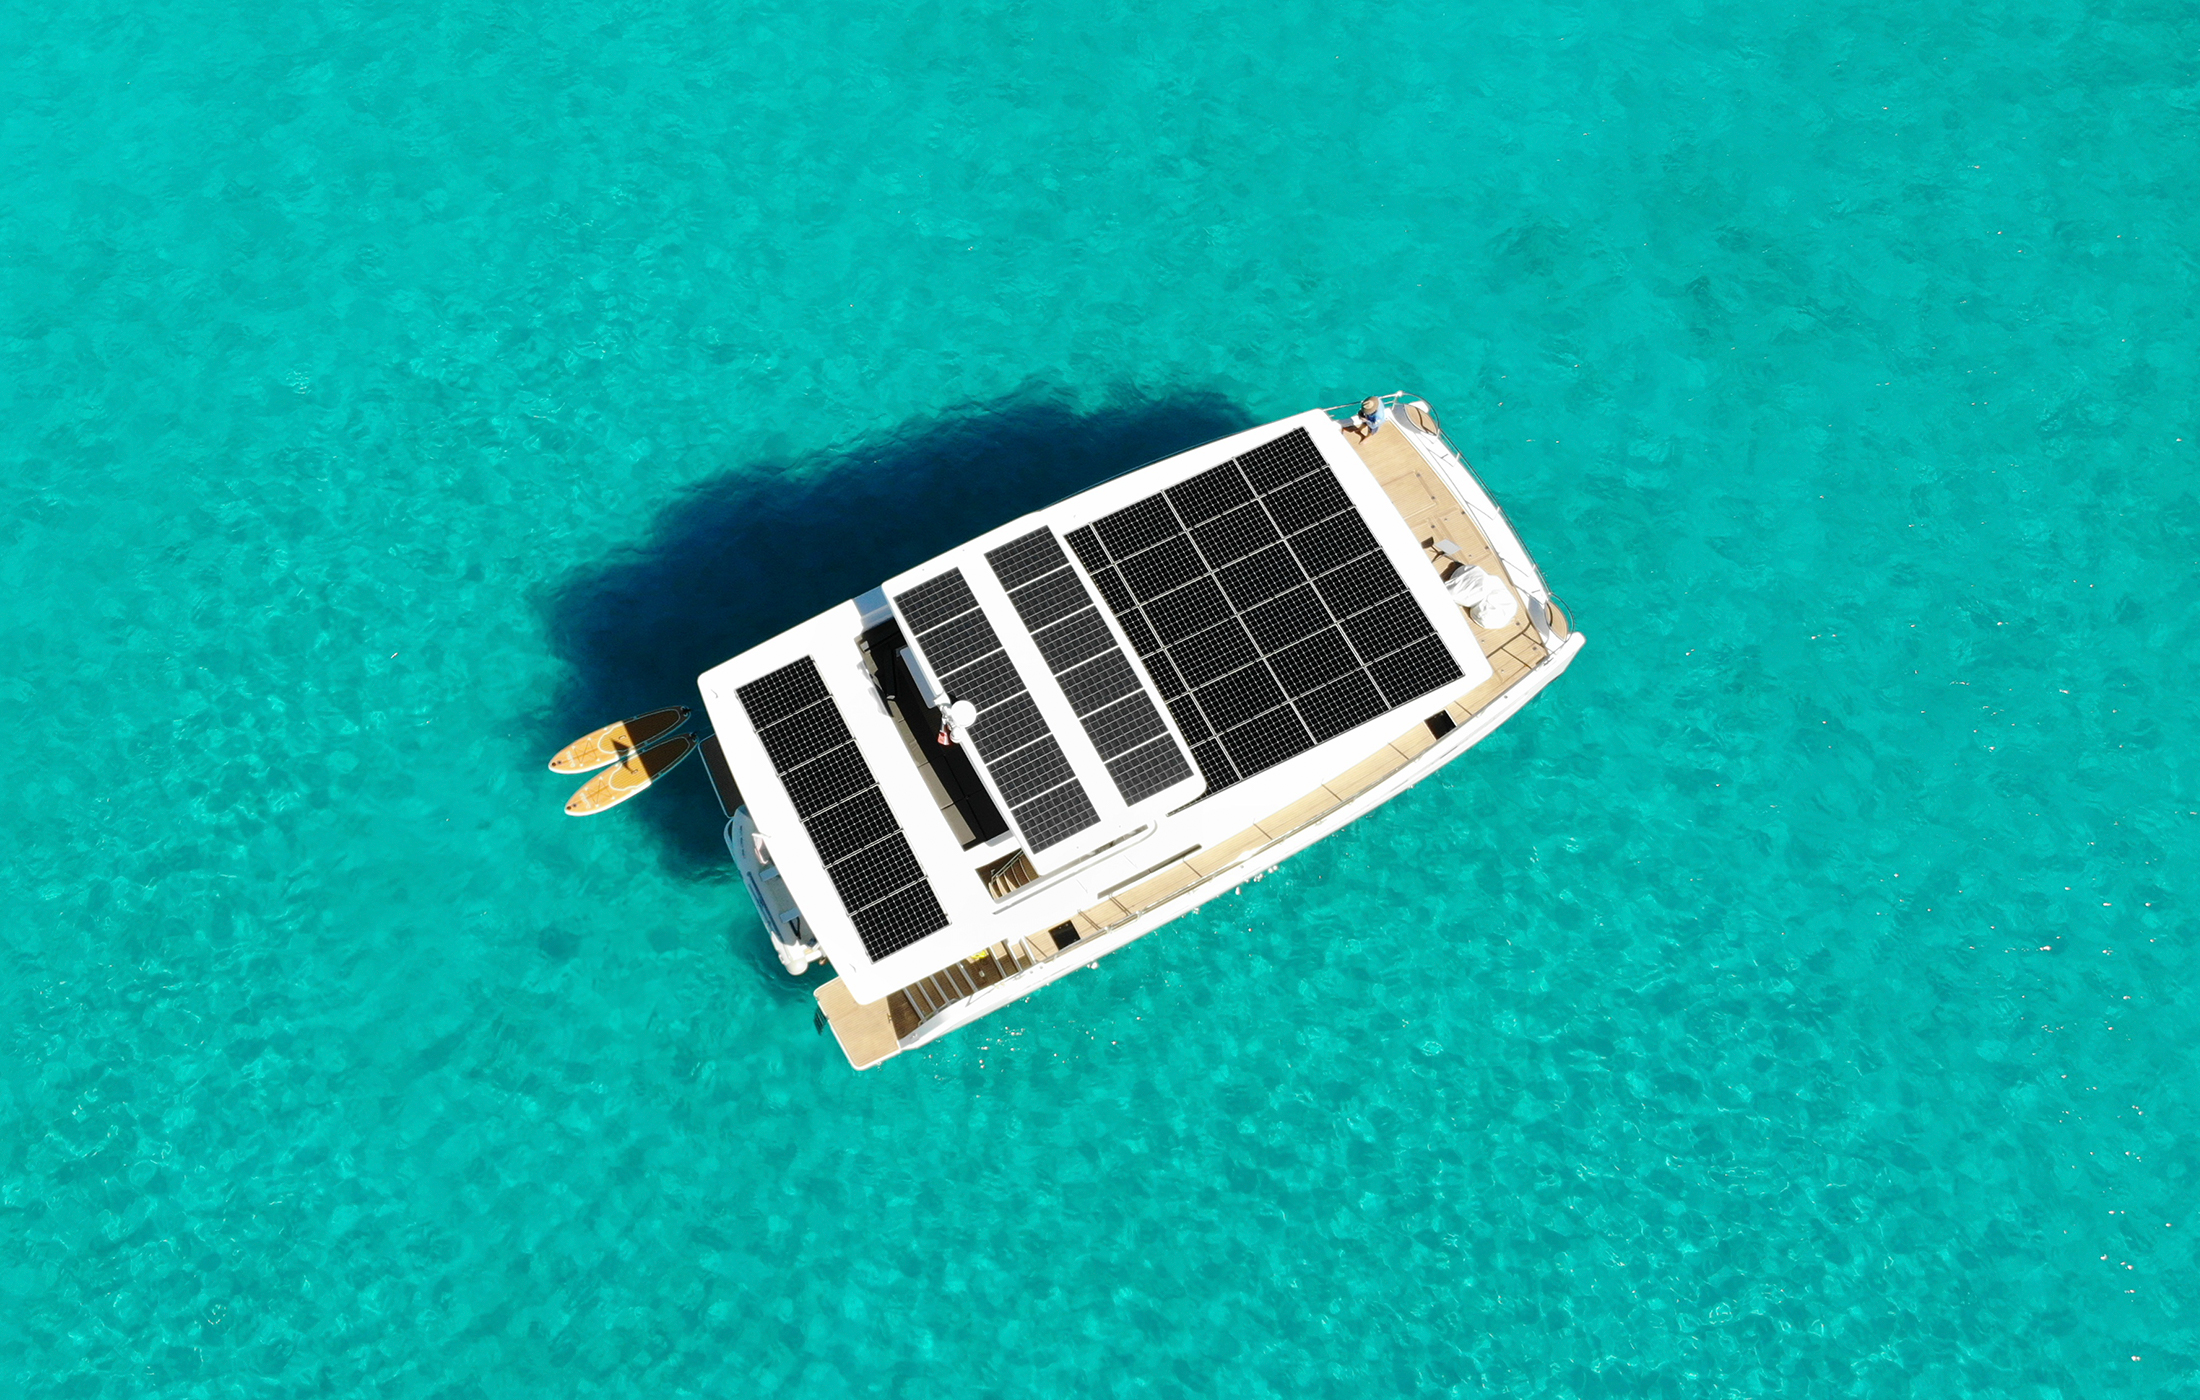 Electric yacht with solar panels on the roof anchored in tuquesa waters